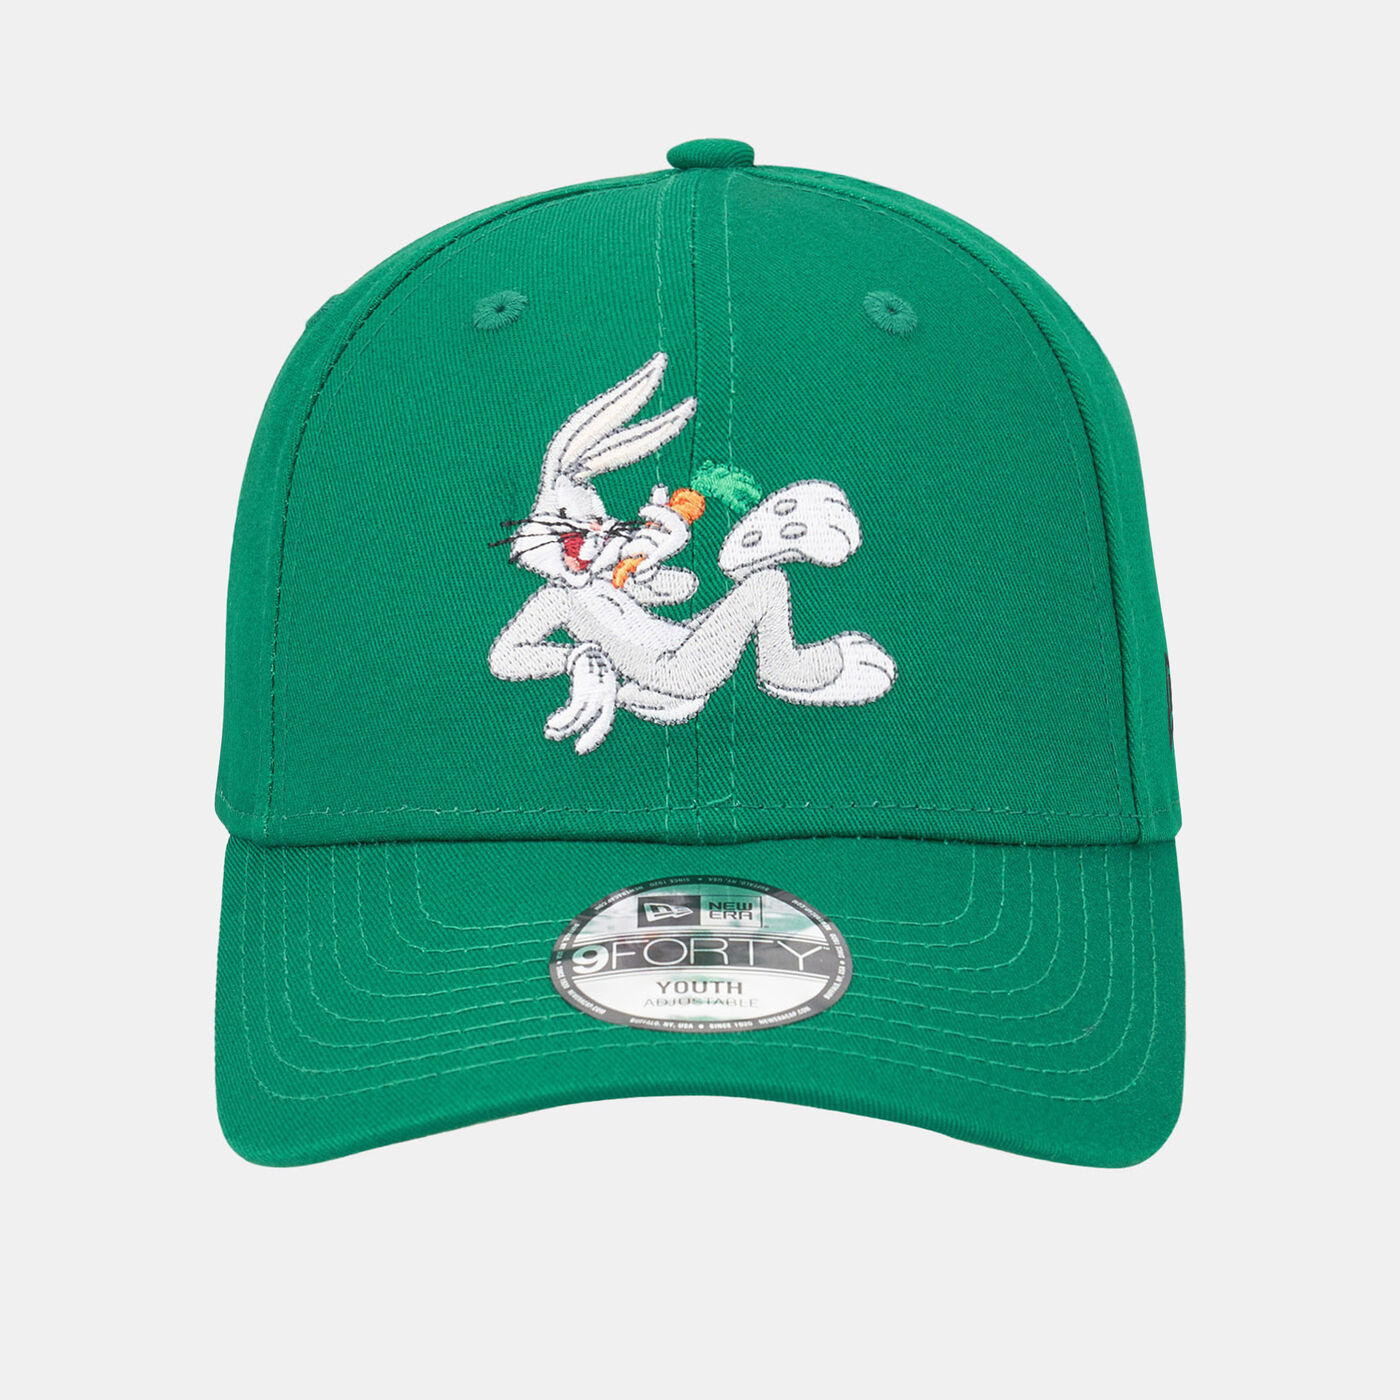 Kids' Looney Tunes 9FORTY Bugs Bunny Cap